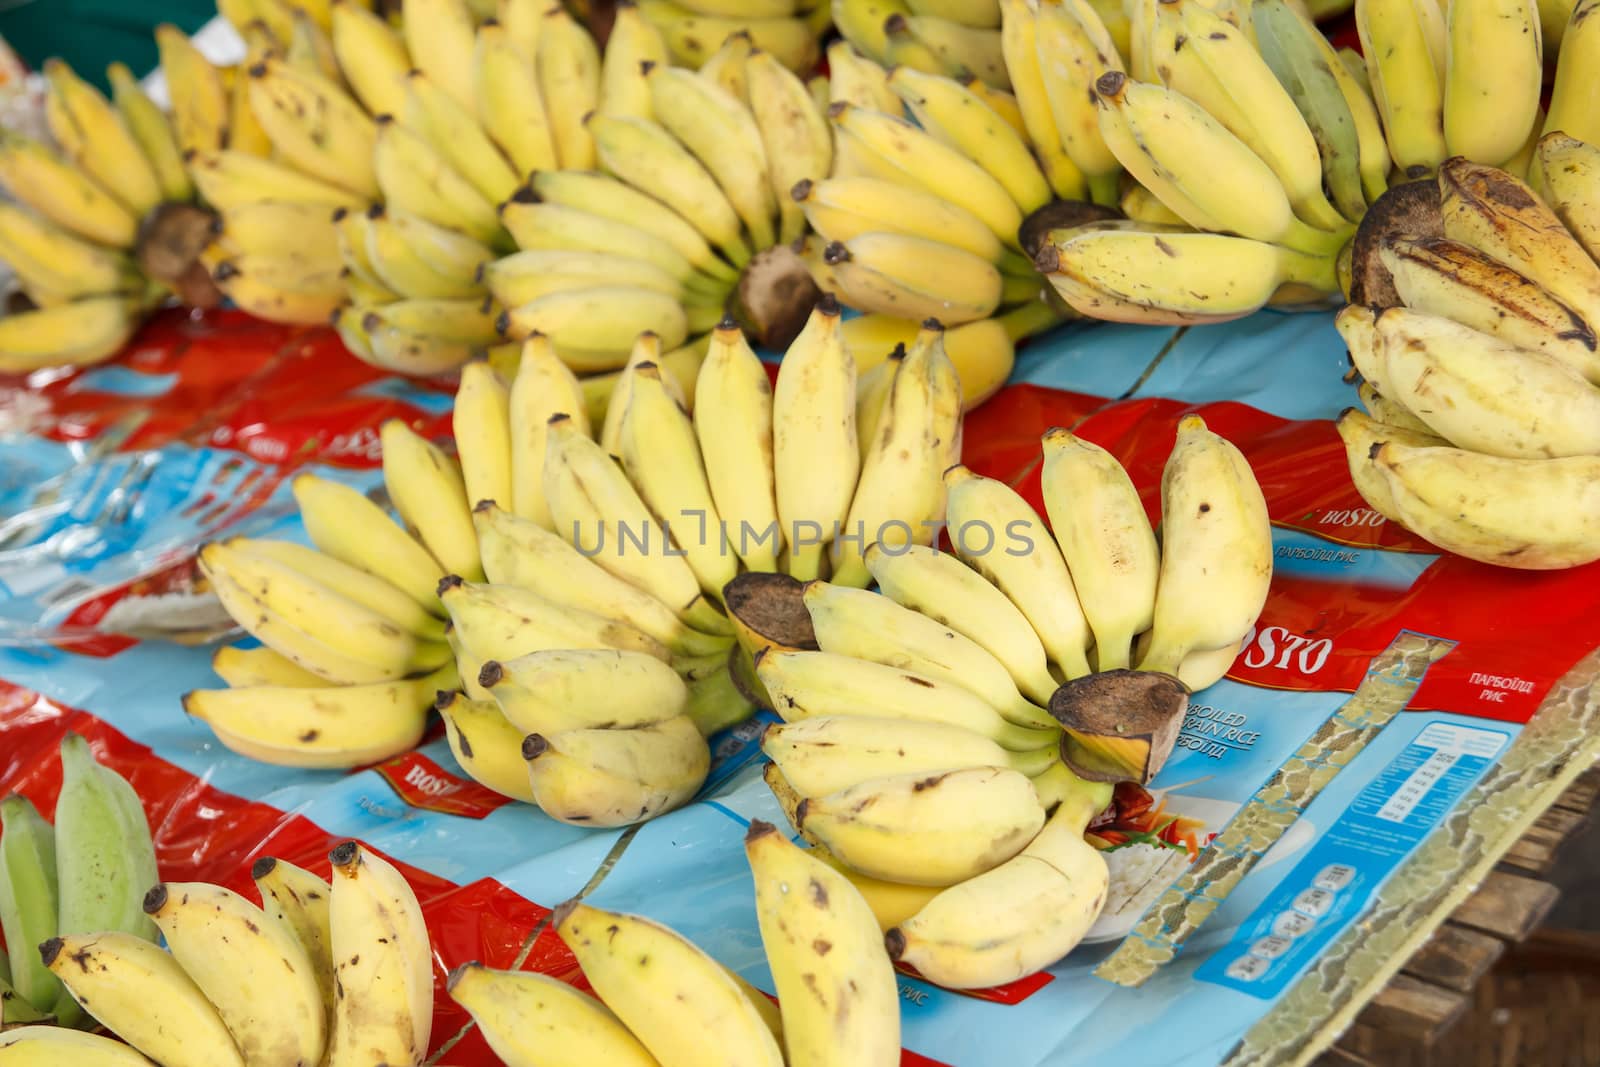 Bunch of ripe Cultivated Banana